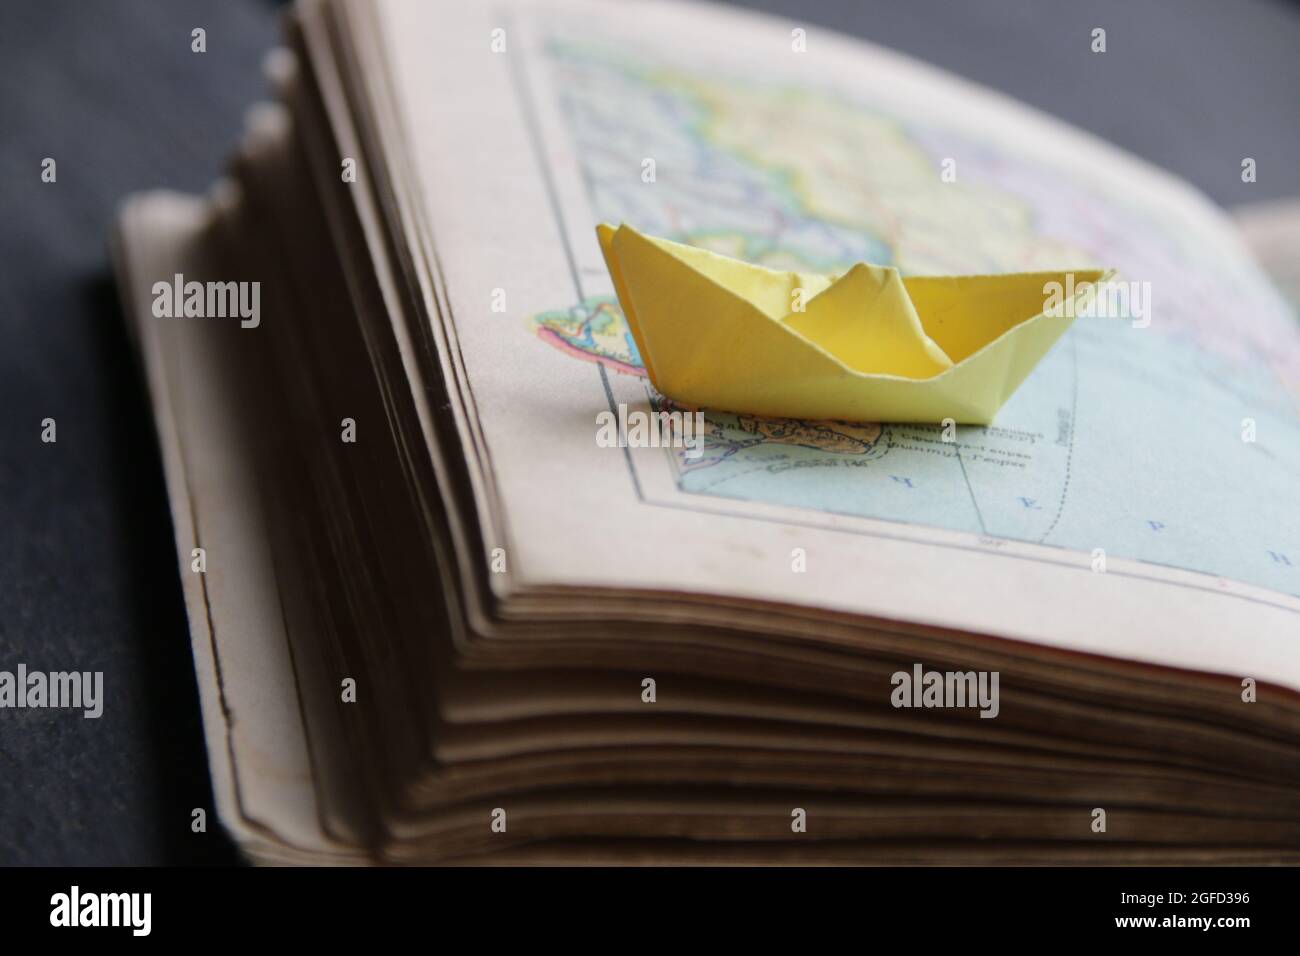 Paper boat on vintage map Stock Photo